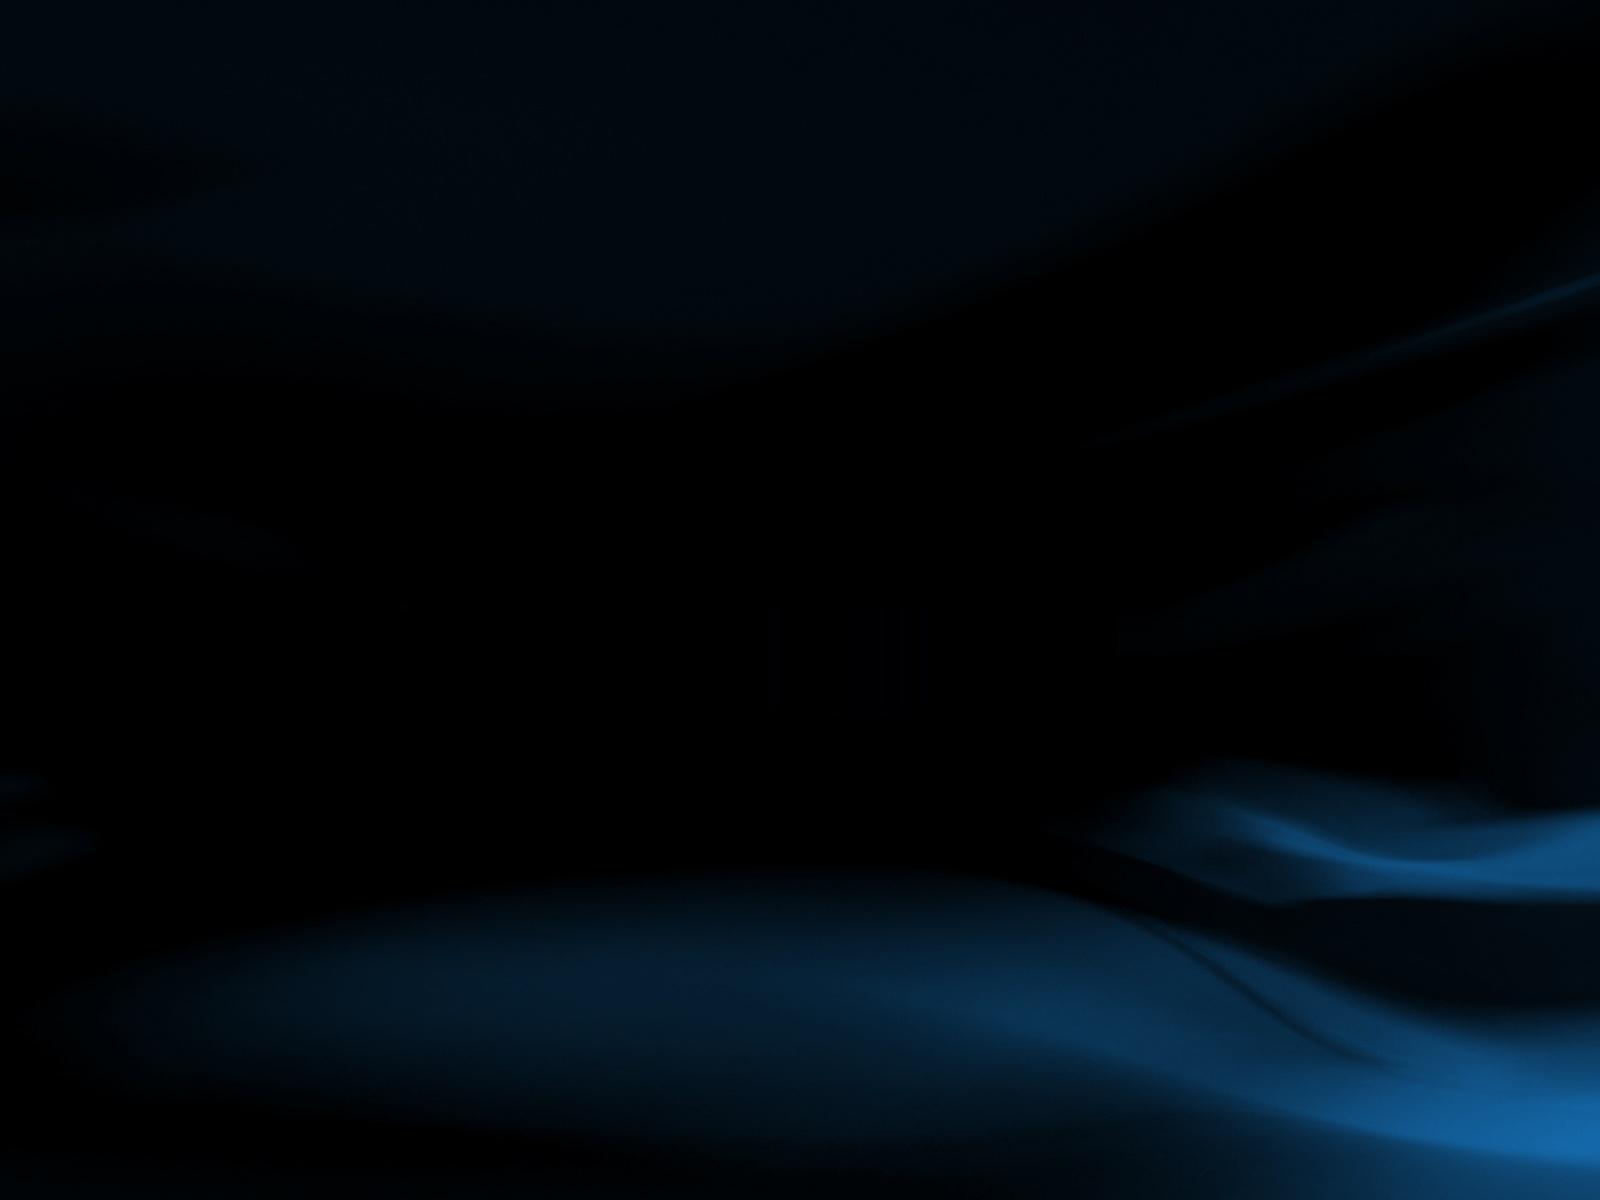 Blue And Black Image 21 Free Wallpaper